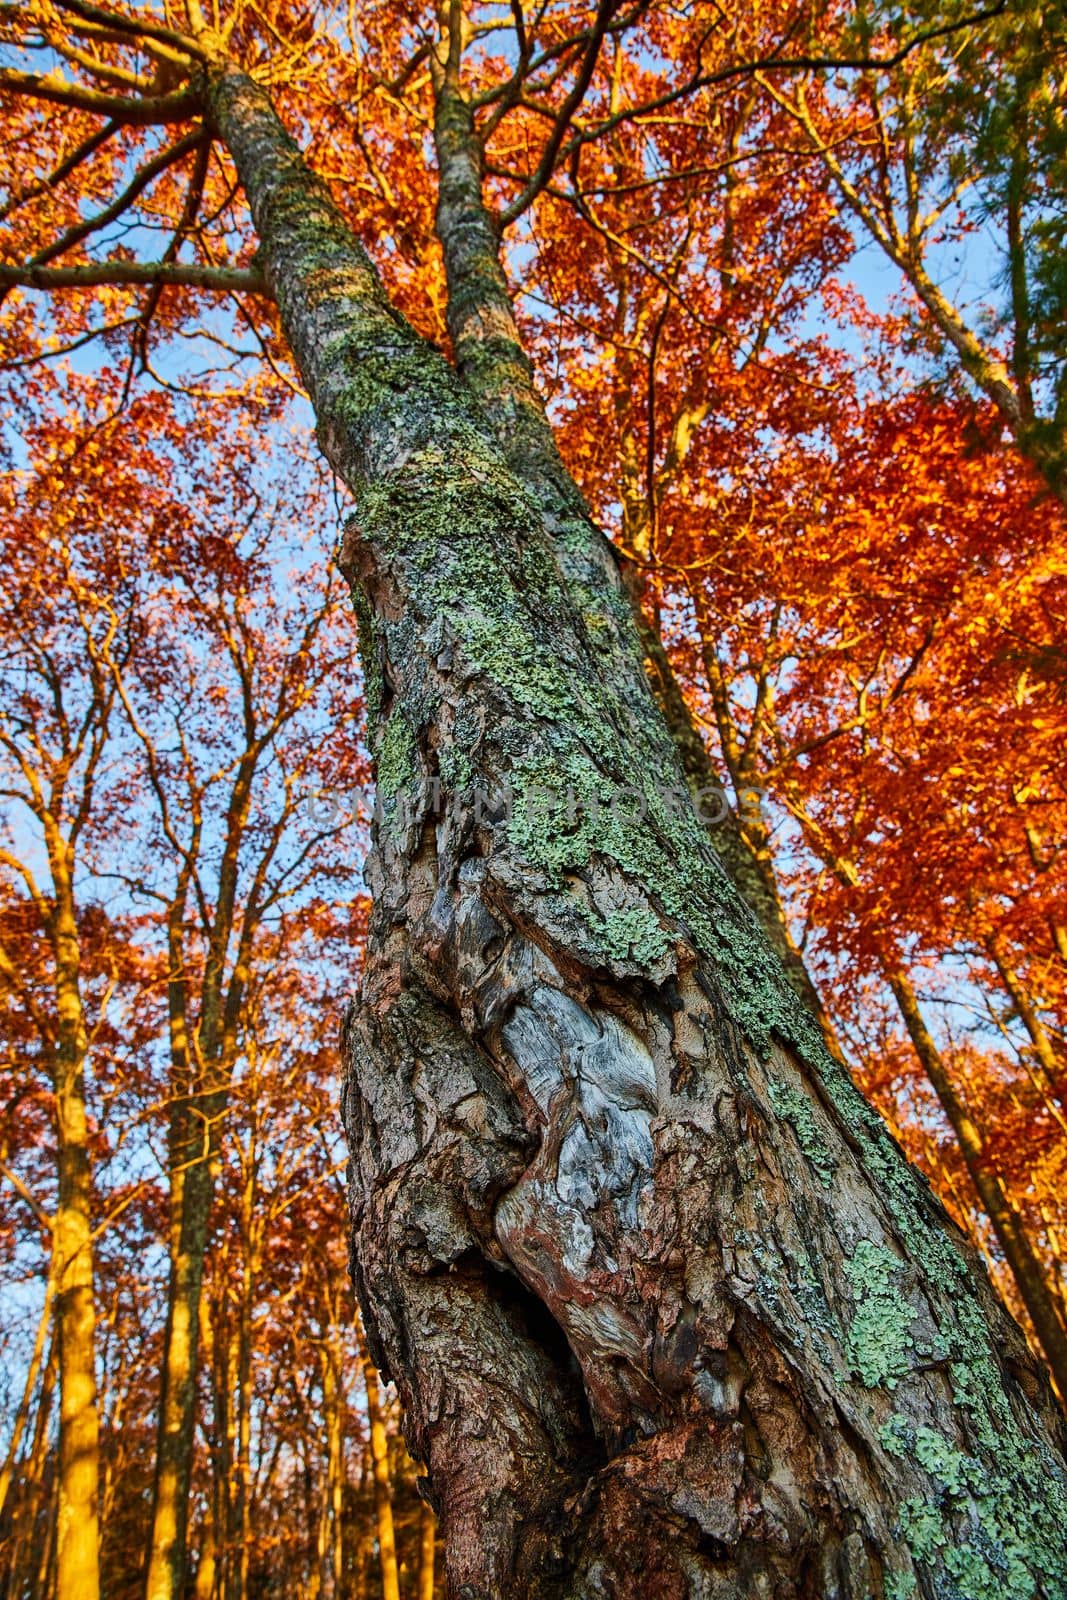 Image of Looking up fall tree with orange leaves and bark covered in lichen